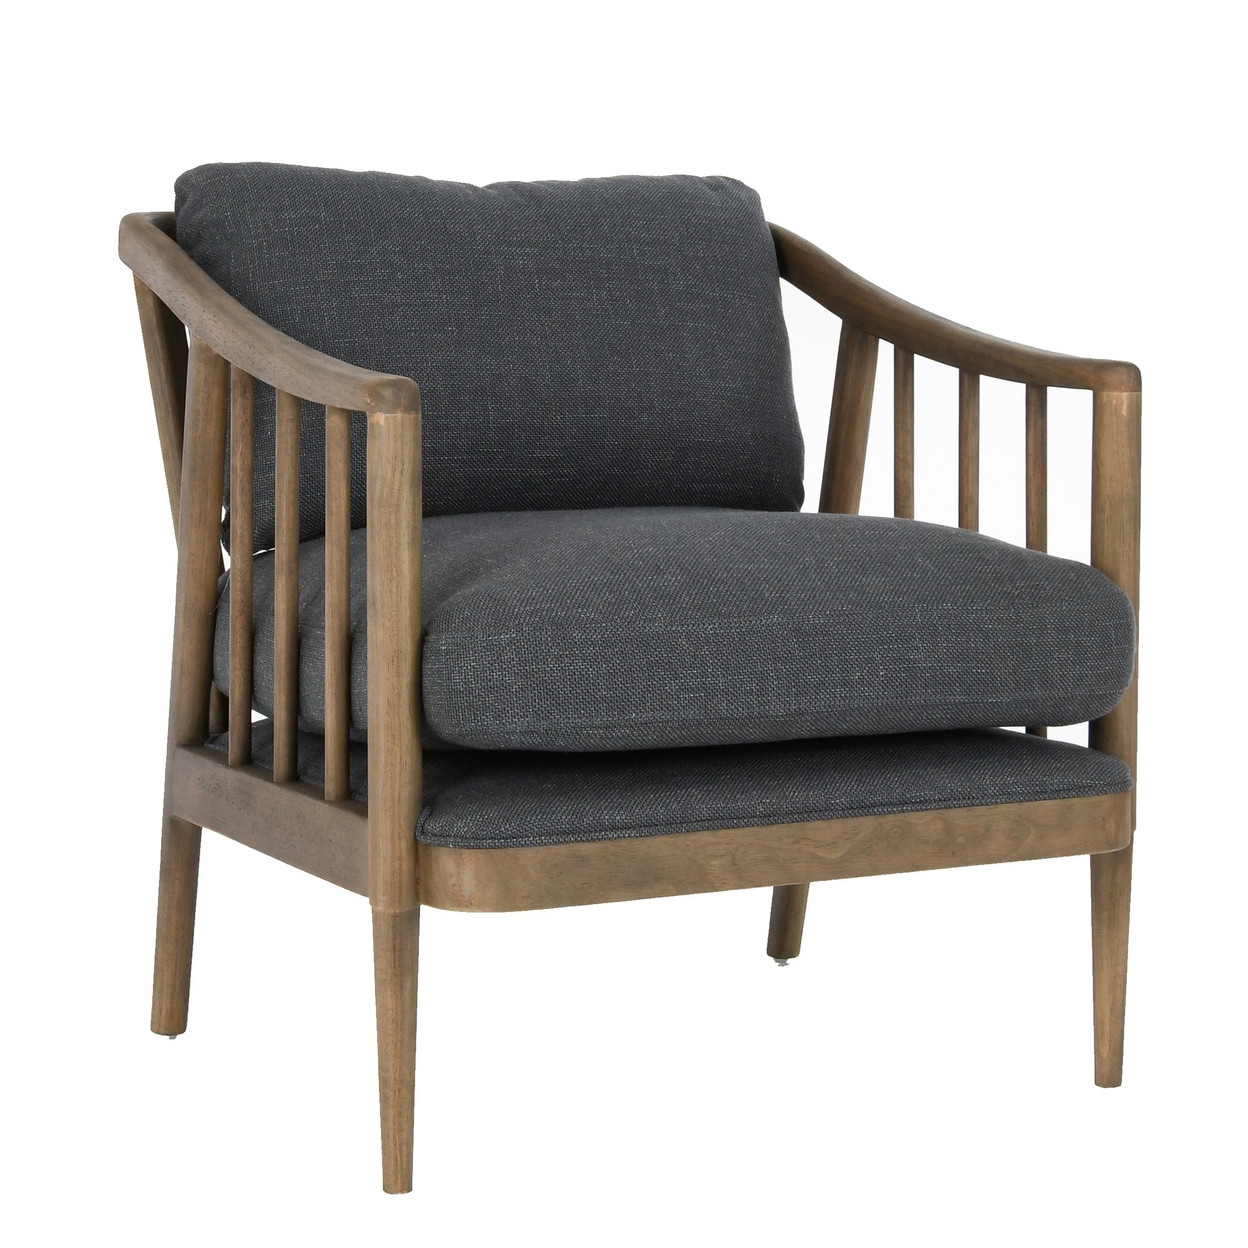 33 Inch Accent Armchair, Padded Cushions, Slatted Back And Arms, Gray - Saltoro Sherpi